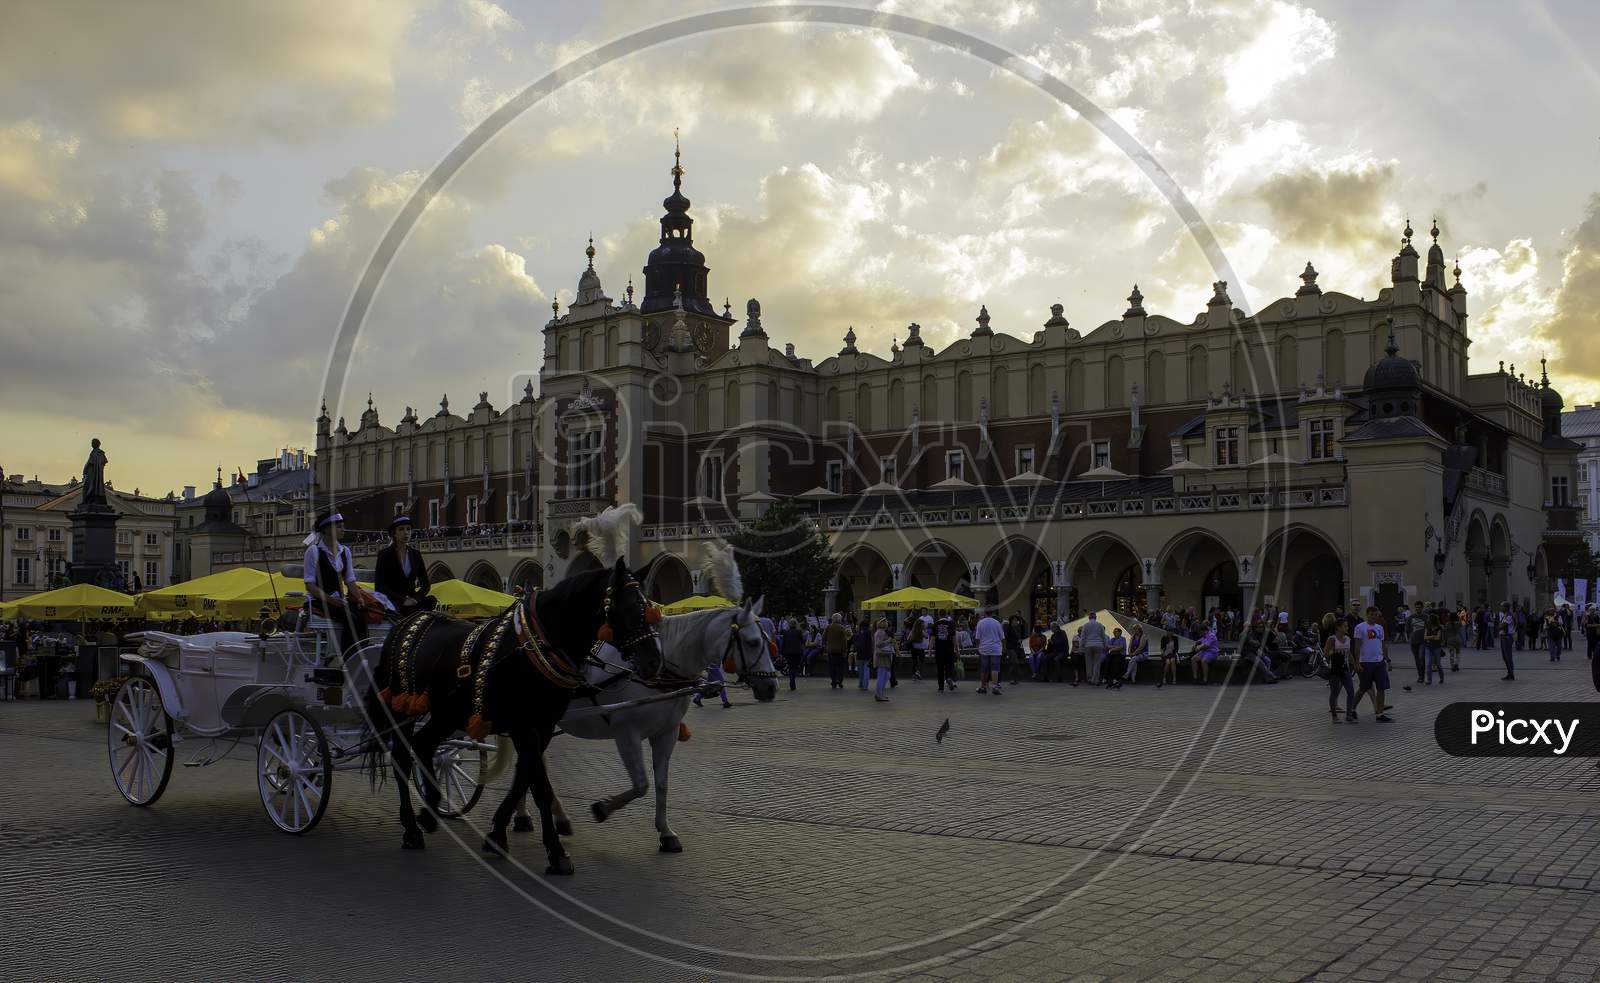 Krakow, Poland - May 23, 2014: A Wide Angle Street View Of Horse Ride In The Touristic Main Square At The Center Of Krakow City In Poland